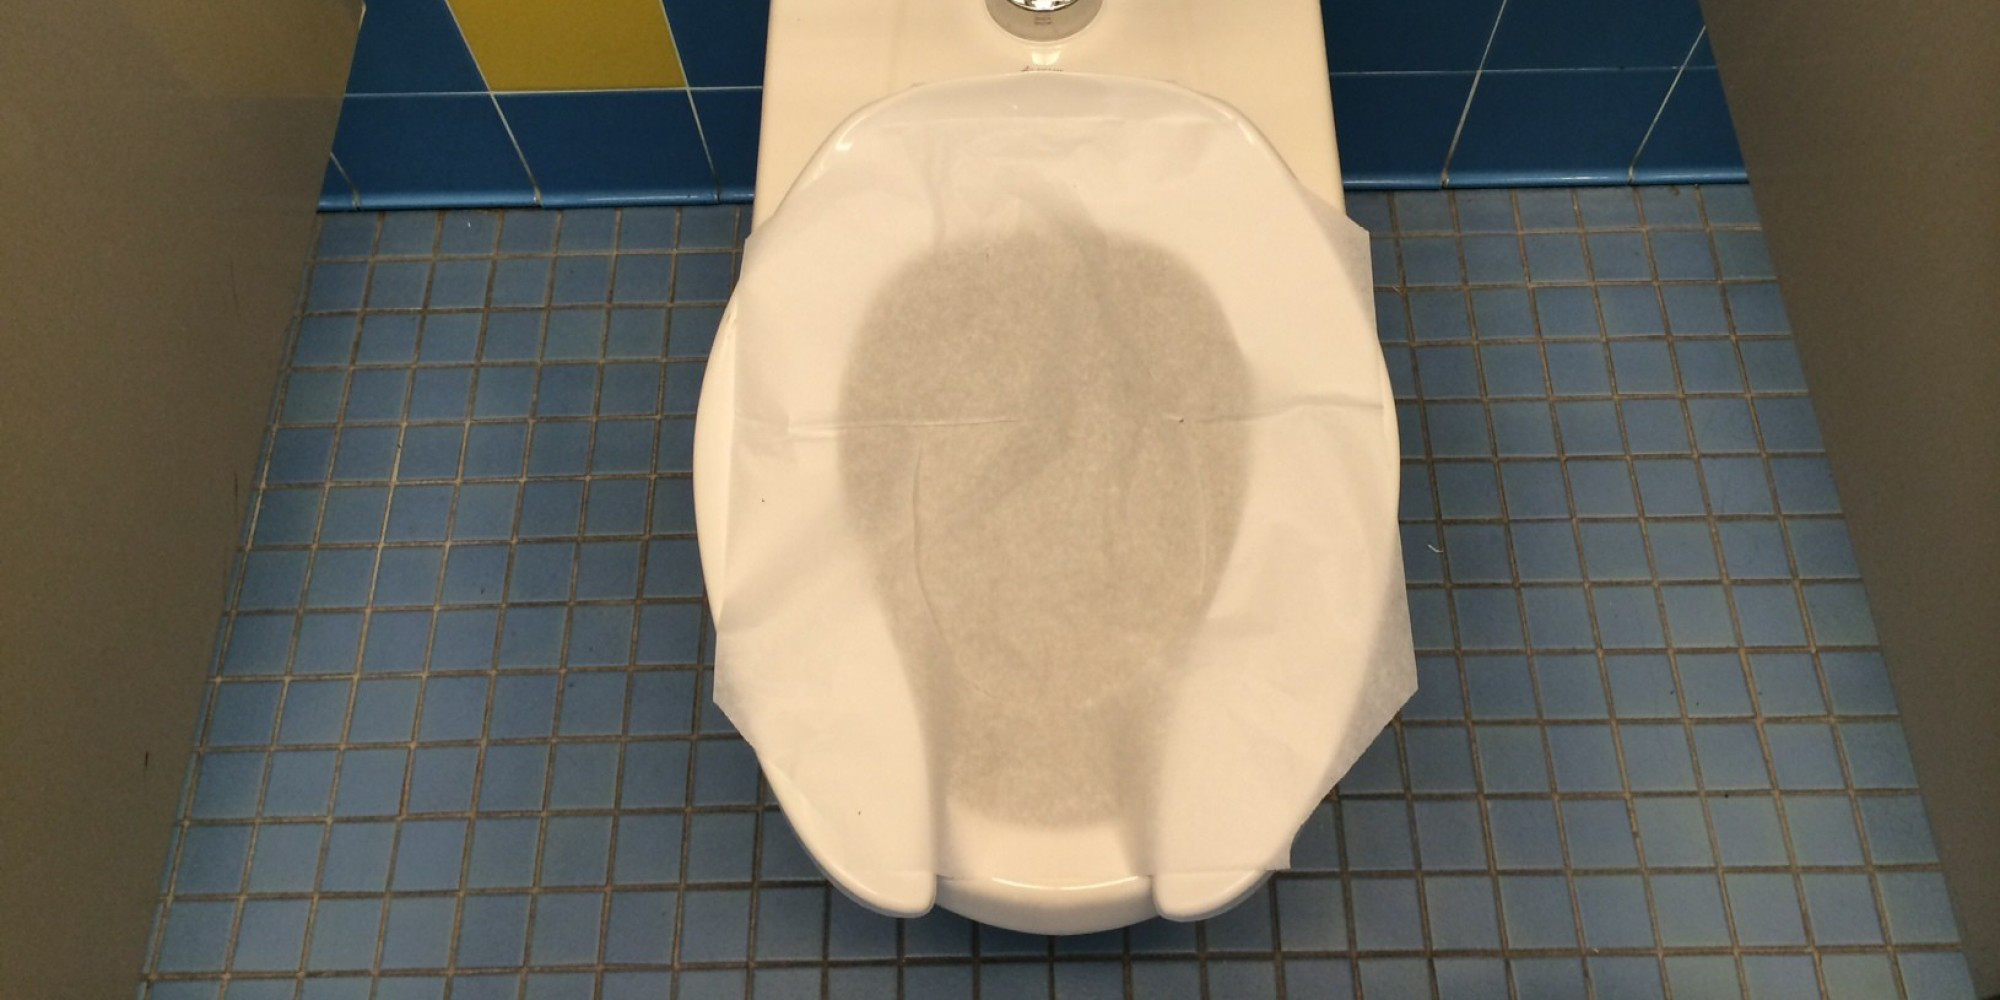 Using toilet seat liners

Viruses like HIV and herpes don’t survive very well outside of a warm human body. By the time you sit down on a public toilet seat, most harmful pathogens likely wouldn’t be able to infect you.